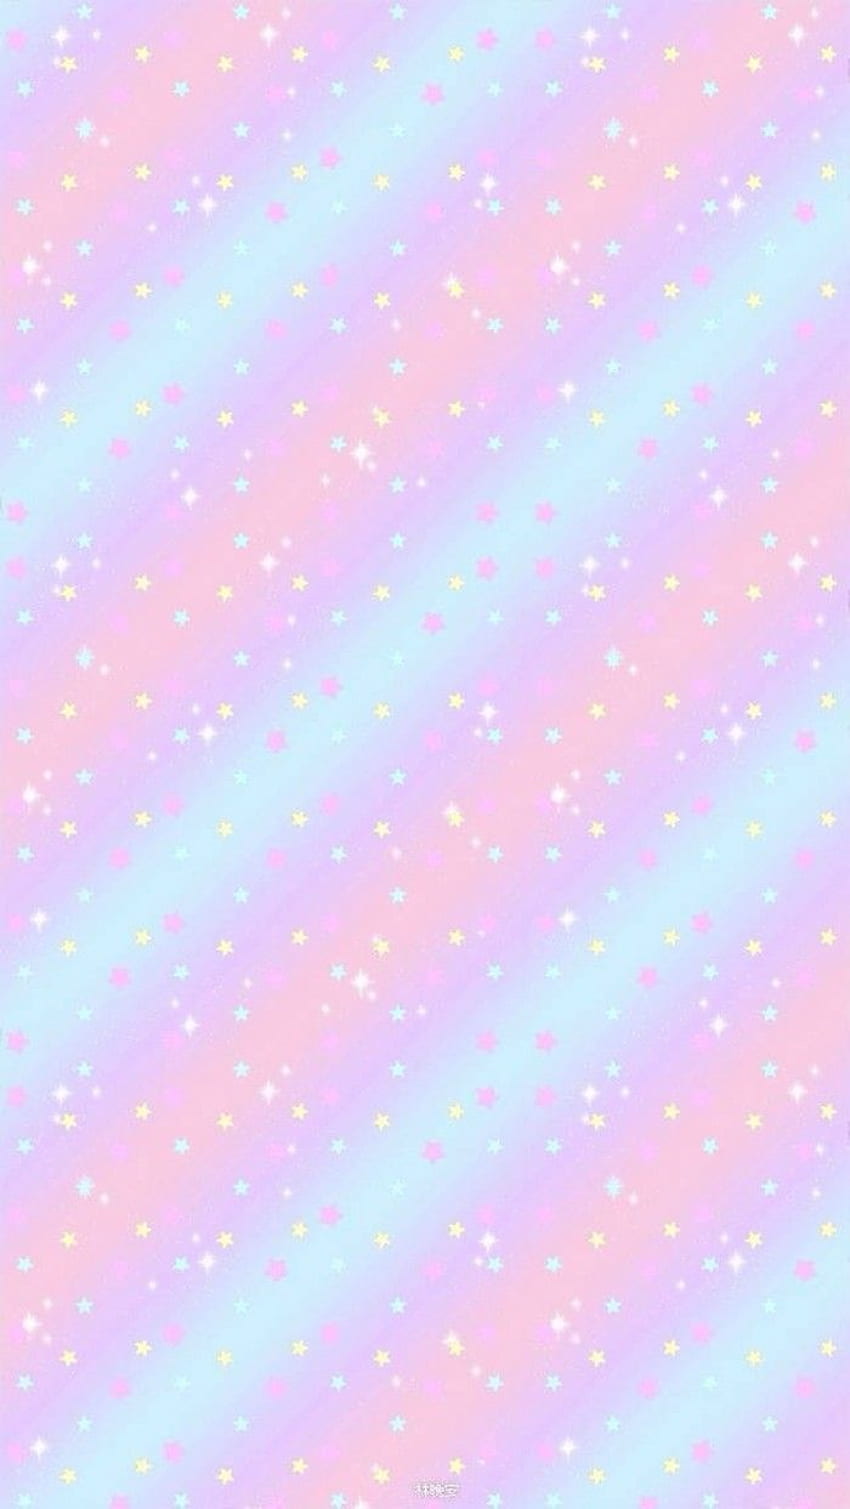 100+] Pastel Rainbow Iphone Wallpapers | Wallpapers.com